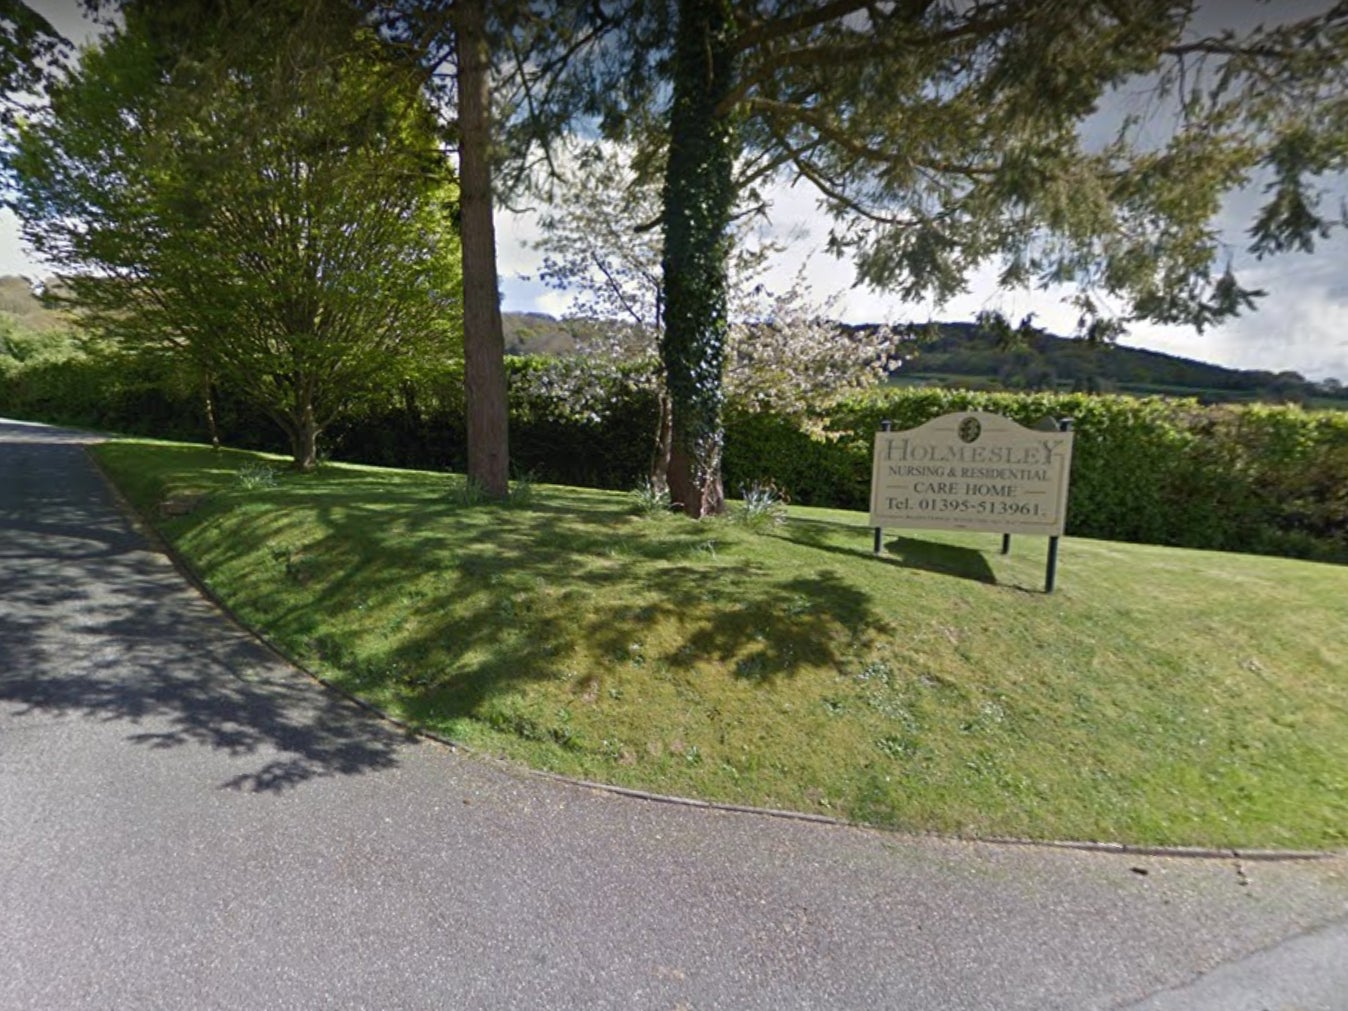 Police investigate a Covid-19 outbreak at Holmesley Care Home in Sidmouth